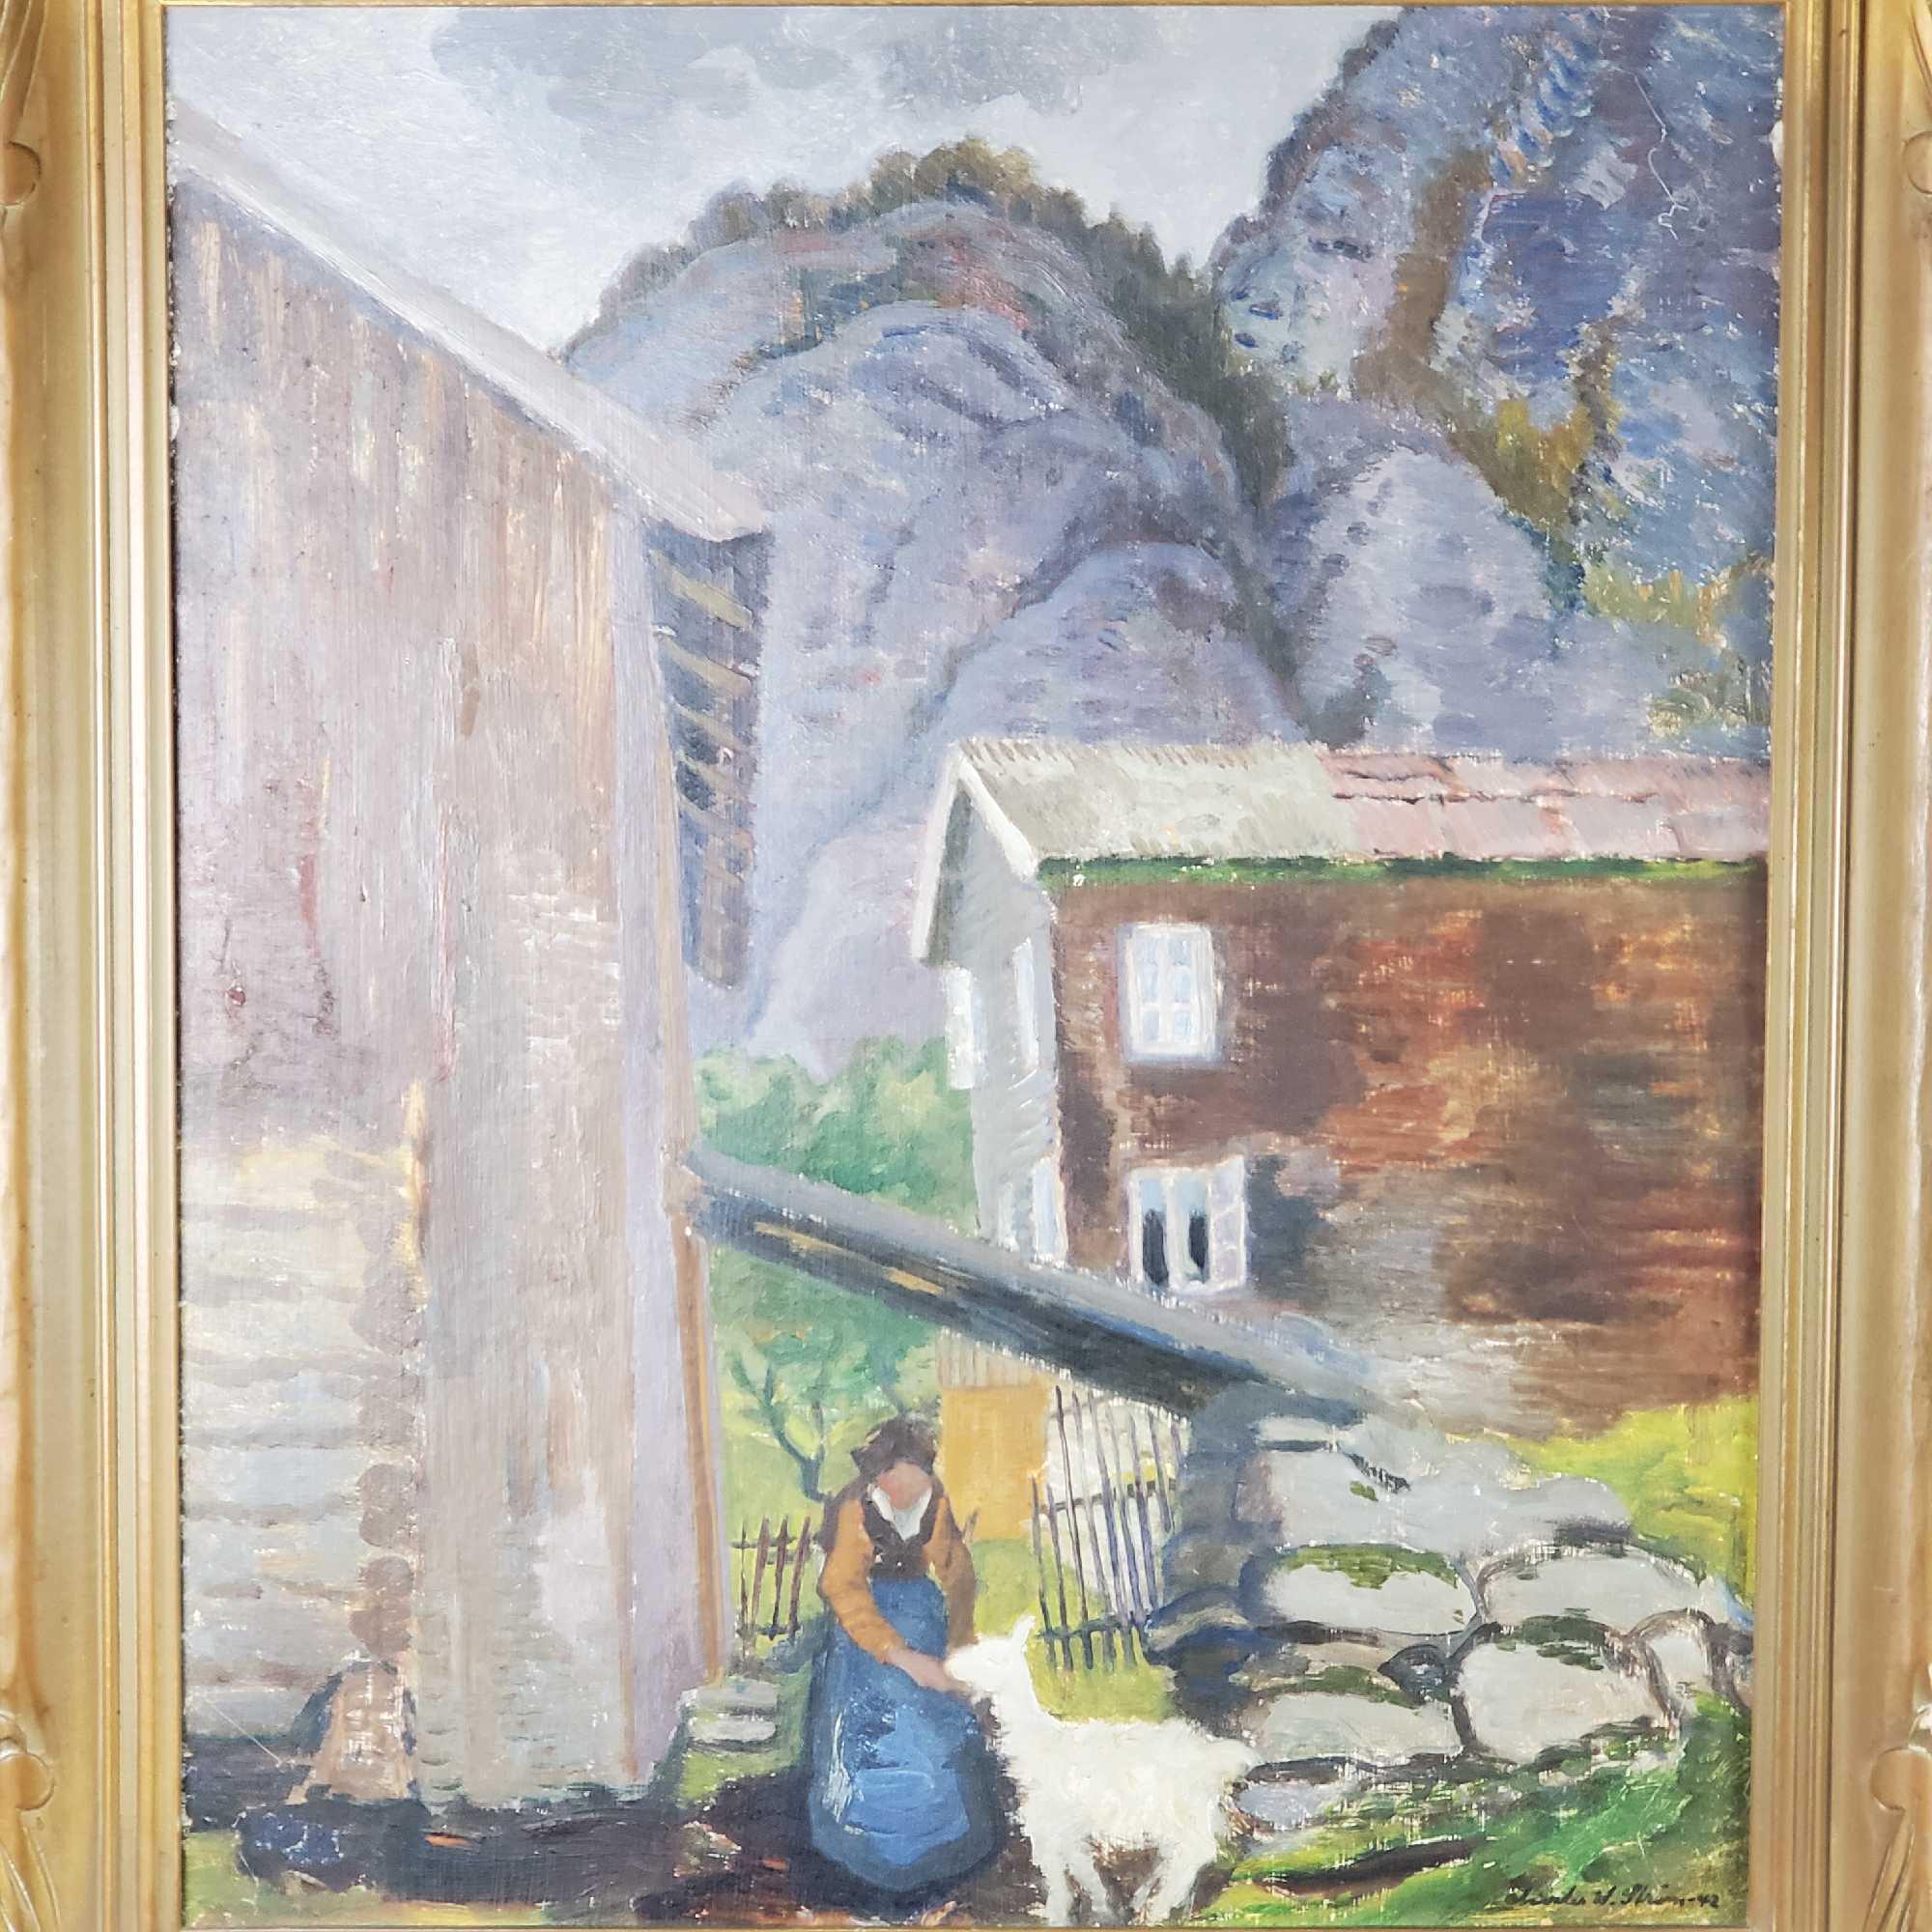 Framed antique oil/Masonite artwork with signature dated 1942